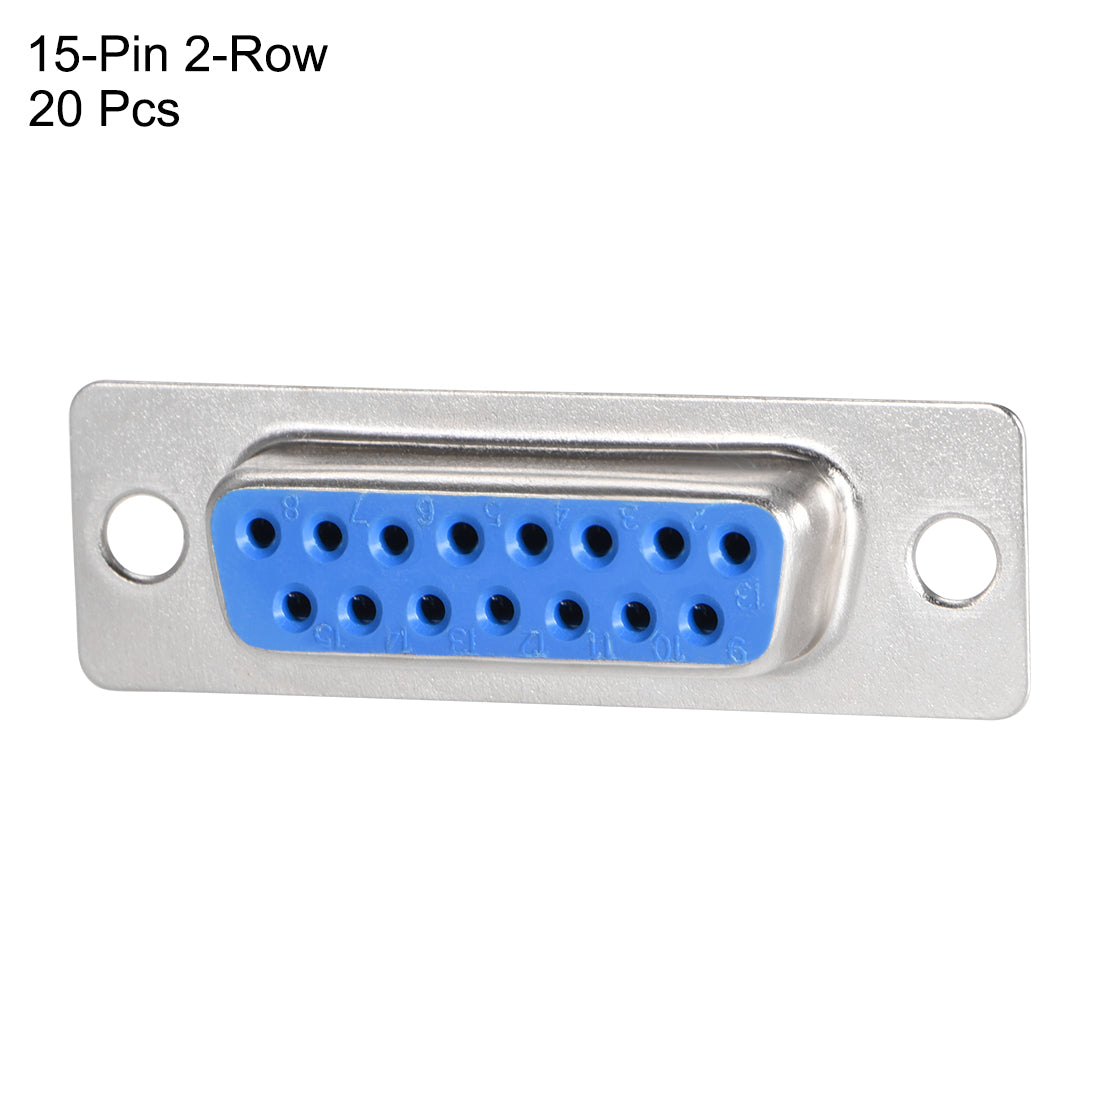 uxcell Uxcell D-sub Connector DB15 Female Socket 15-pin 2-row Port Terminal Breakout for Mechanical Equipment CNC Computers Blue 20pcs